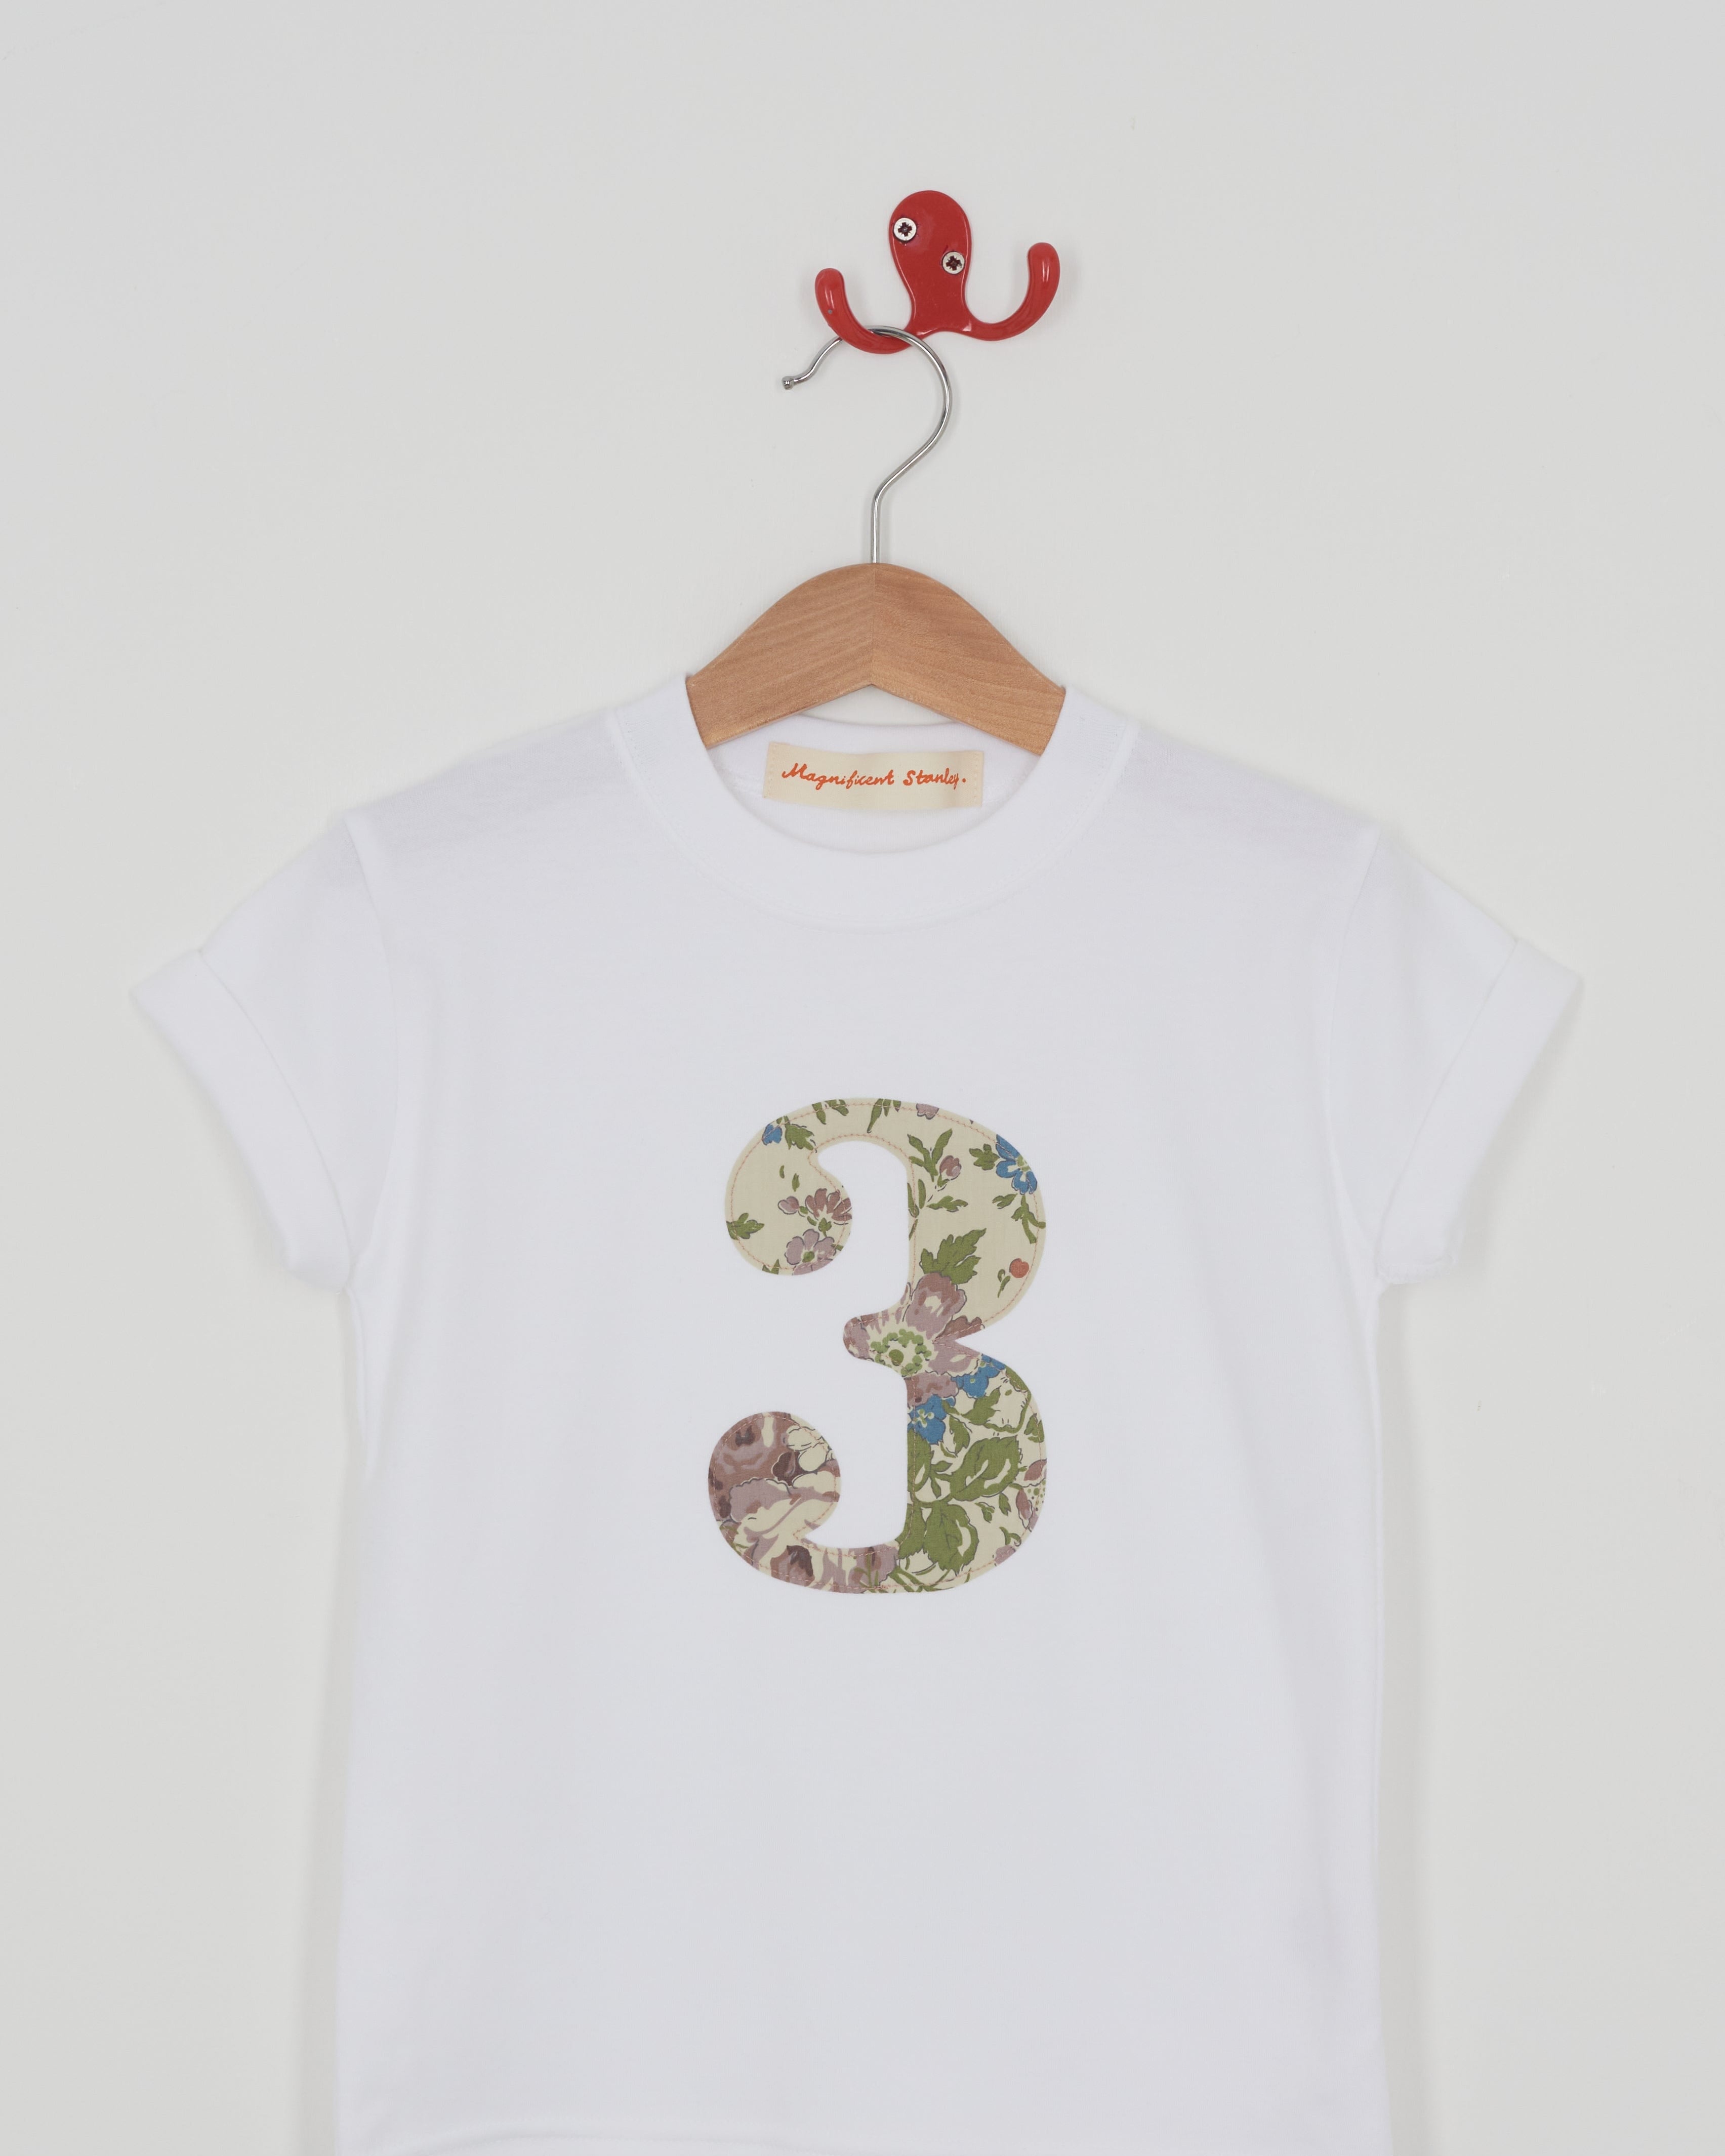 Magnificent Stanley Tee Vintage Rose Ellen Personalised or Number White T-Shirt FABLE HEART Collaboration